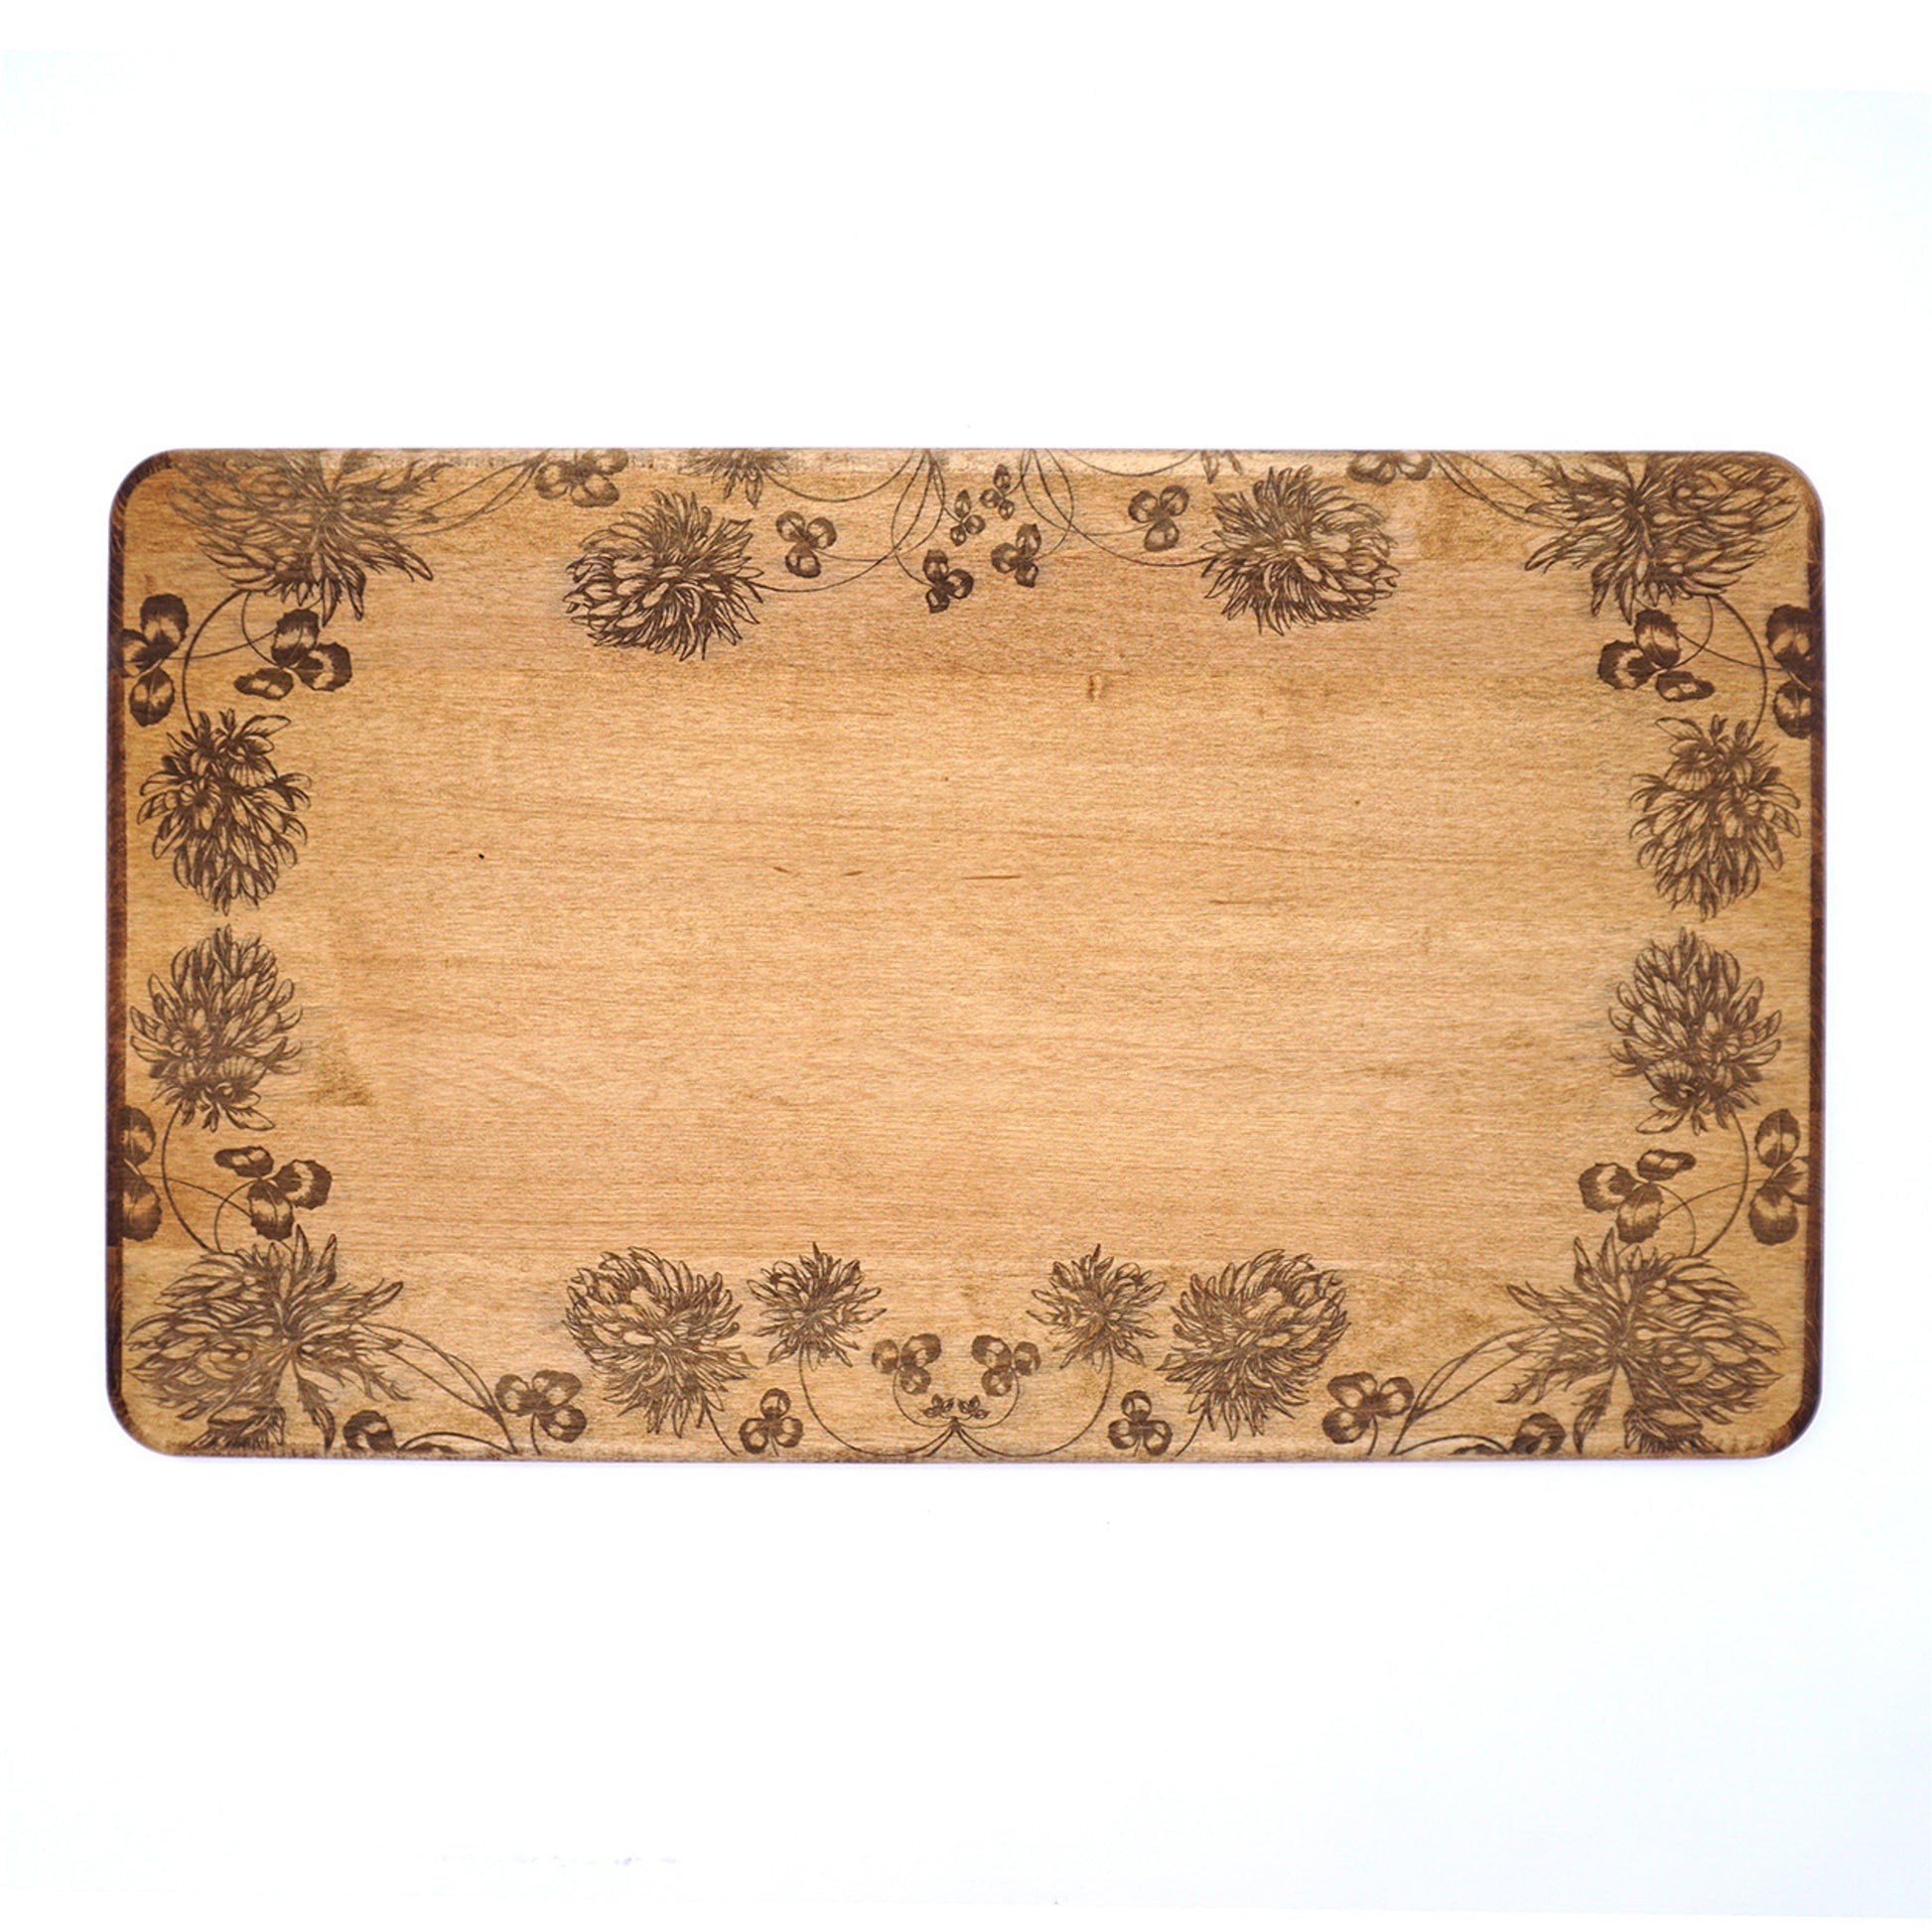 Laura Zindel Maple Artisan Serving Board - More designs available